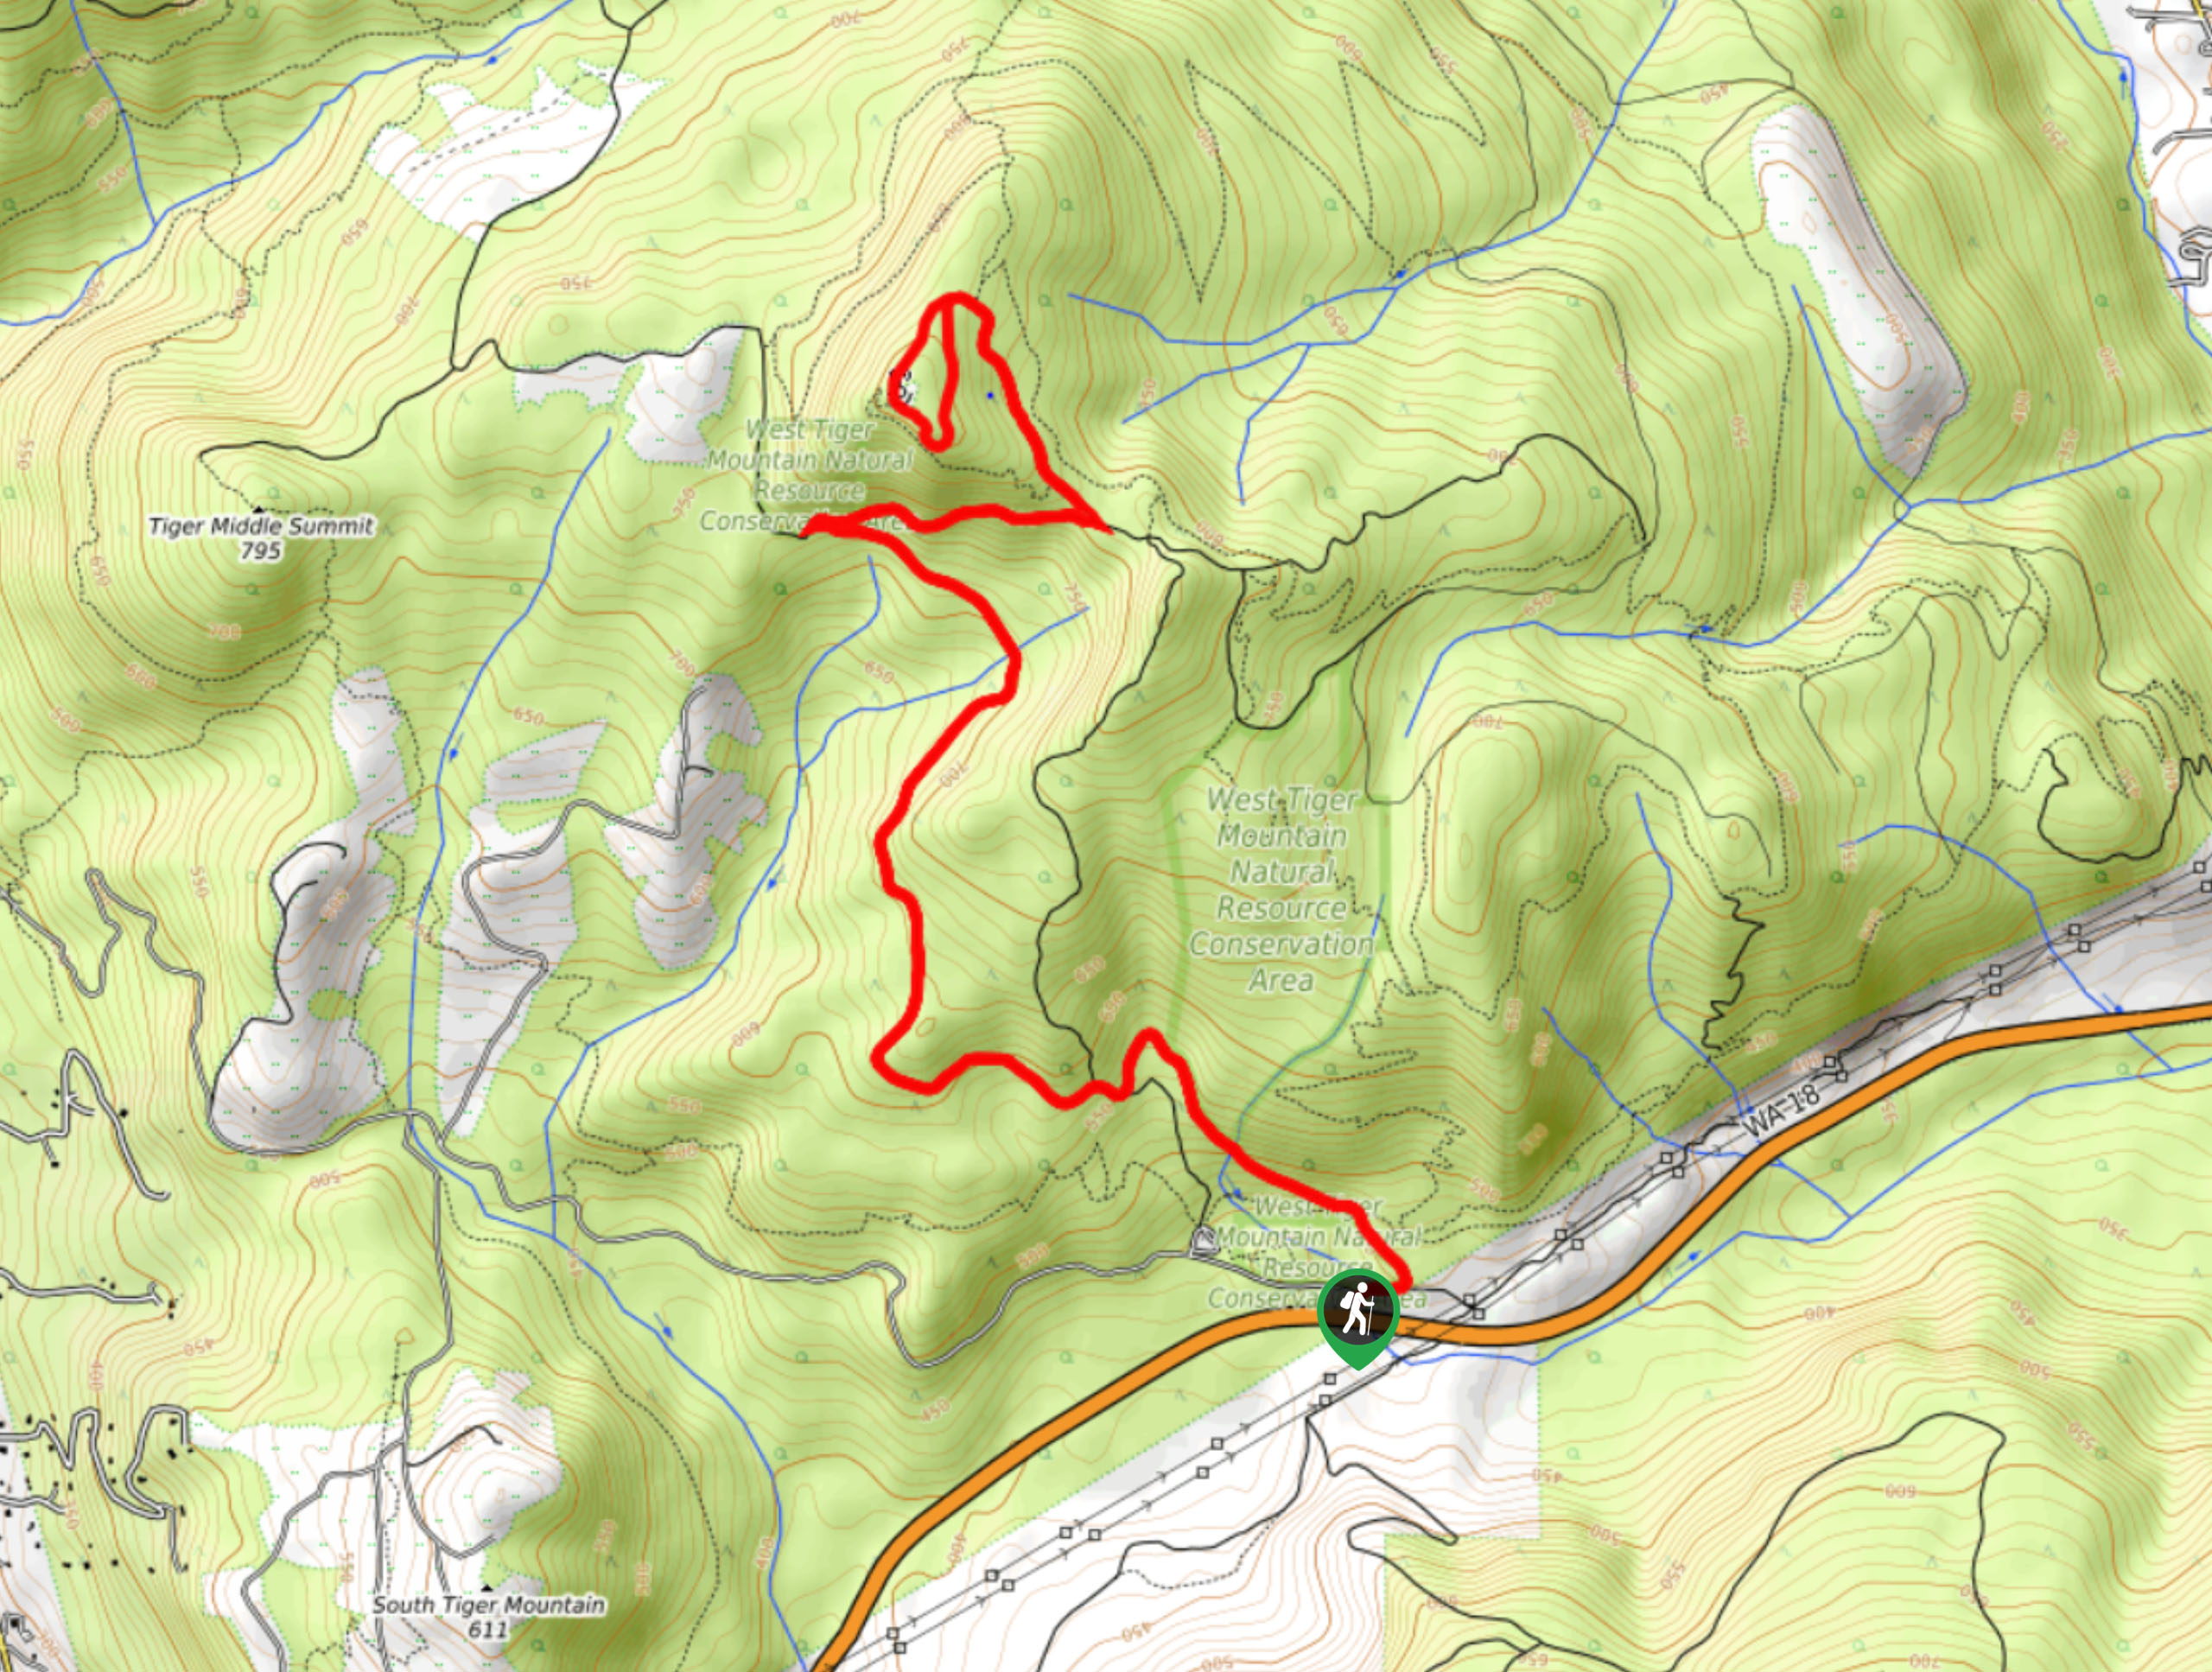 East Tiger Mountain Summit Hike Map